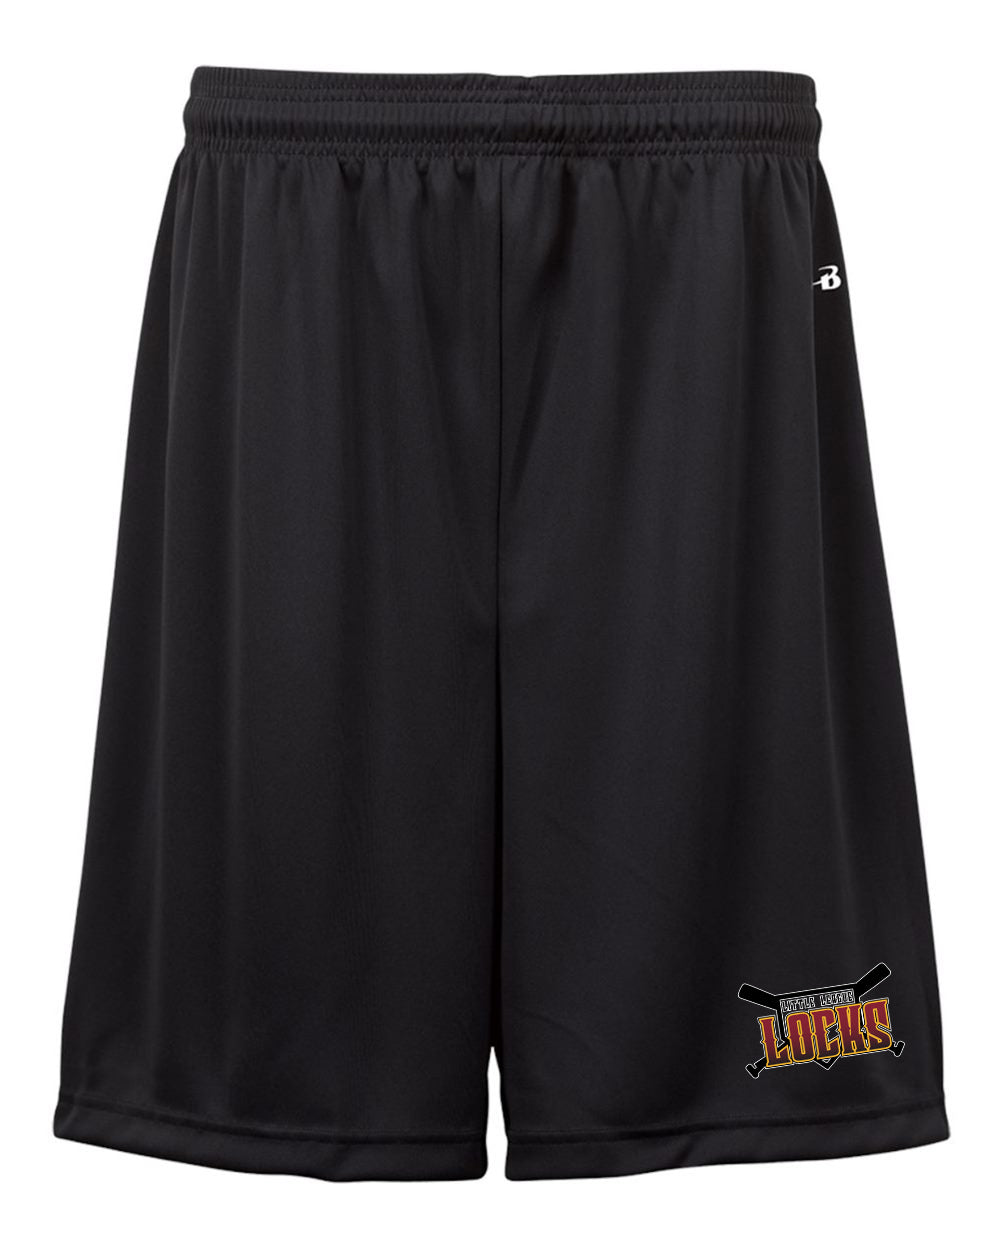 Locks Youth Badger Shorts "Classic" - 2107 (color options available)